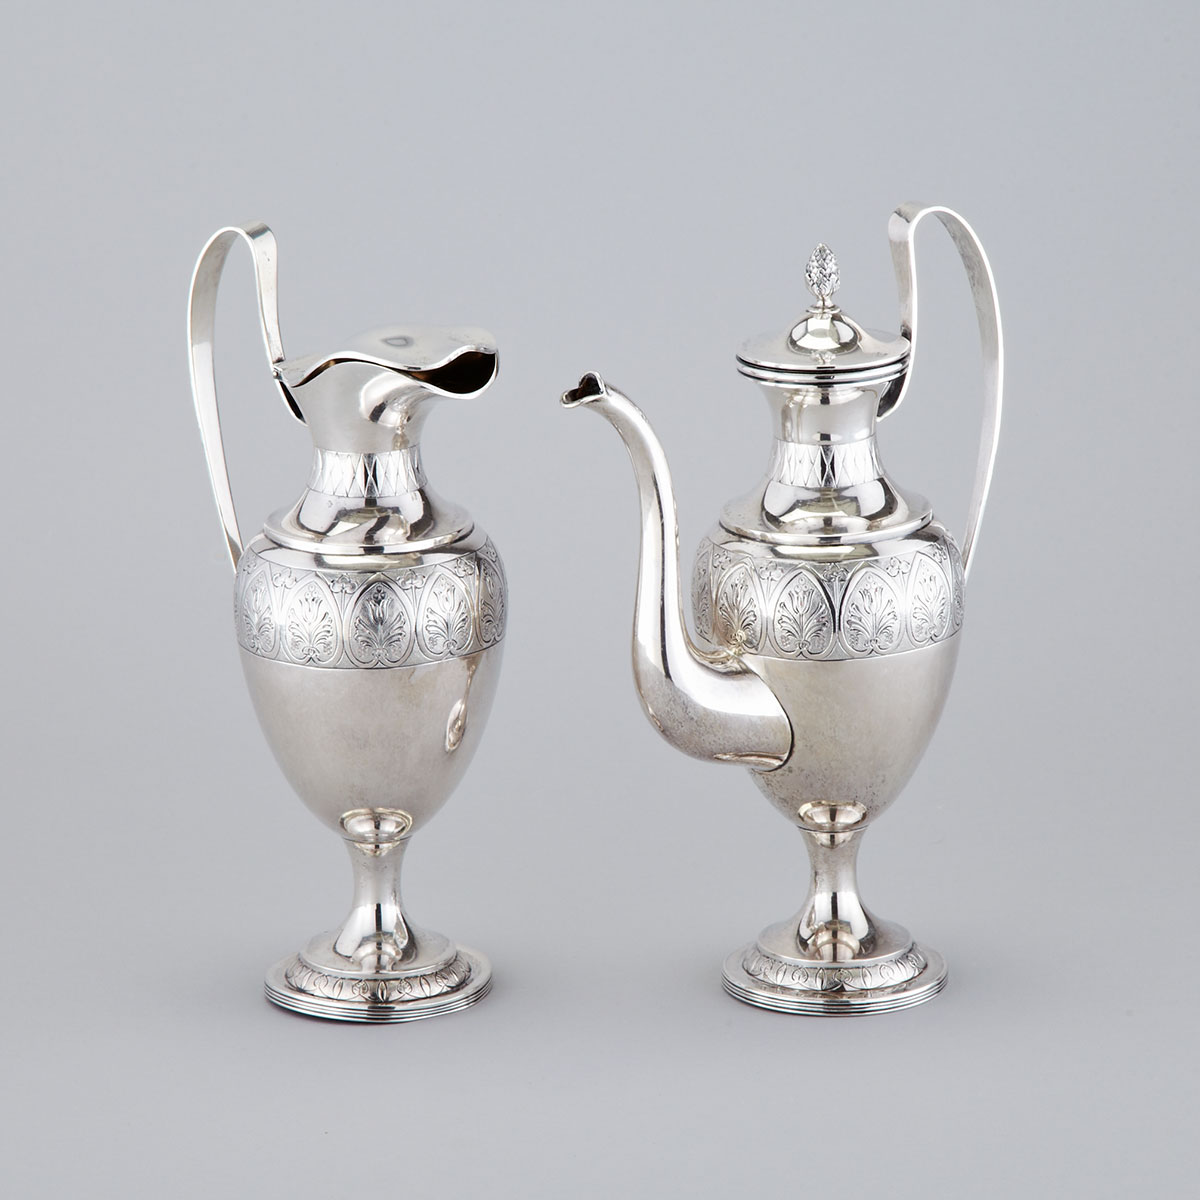 Austrian Neo-Classical Style Silver Coffee Pot and Hot Water Jug, Vienna, c.1890